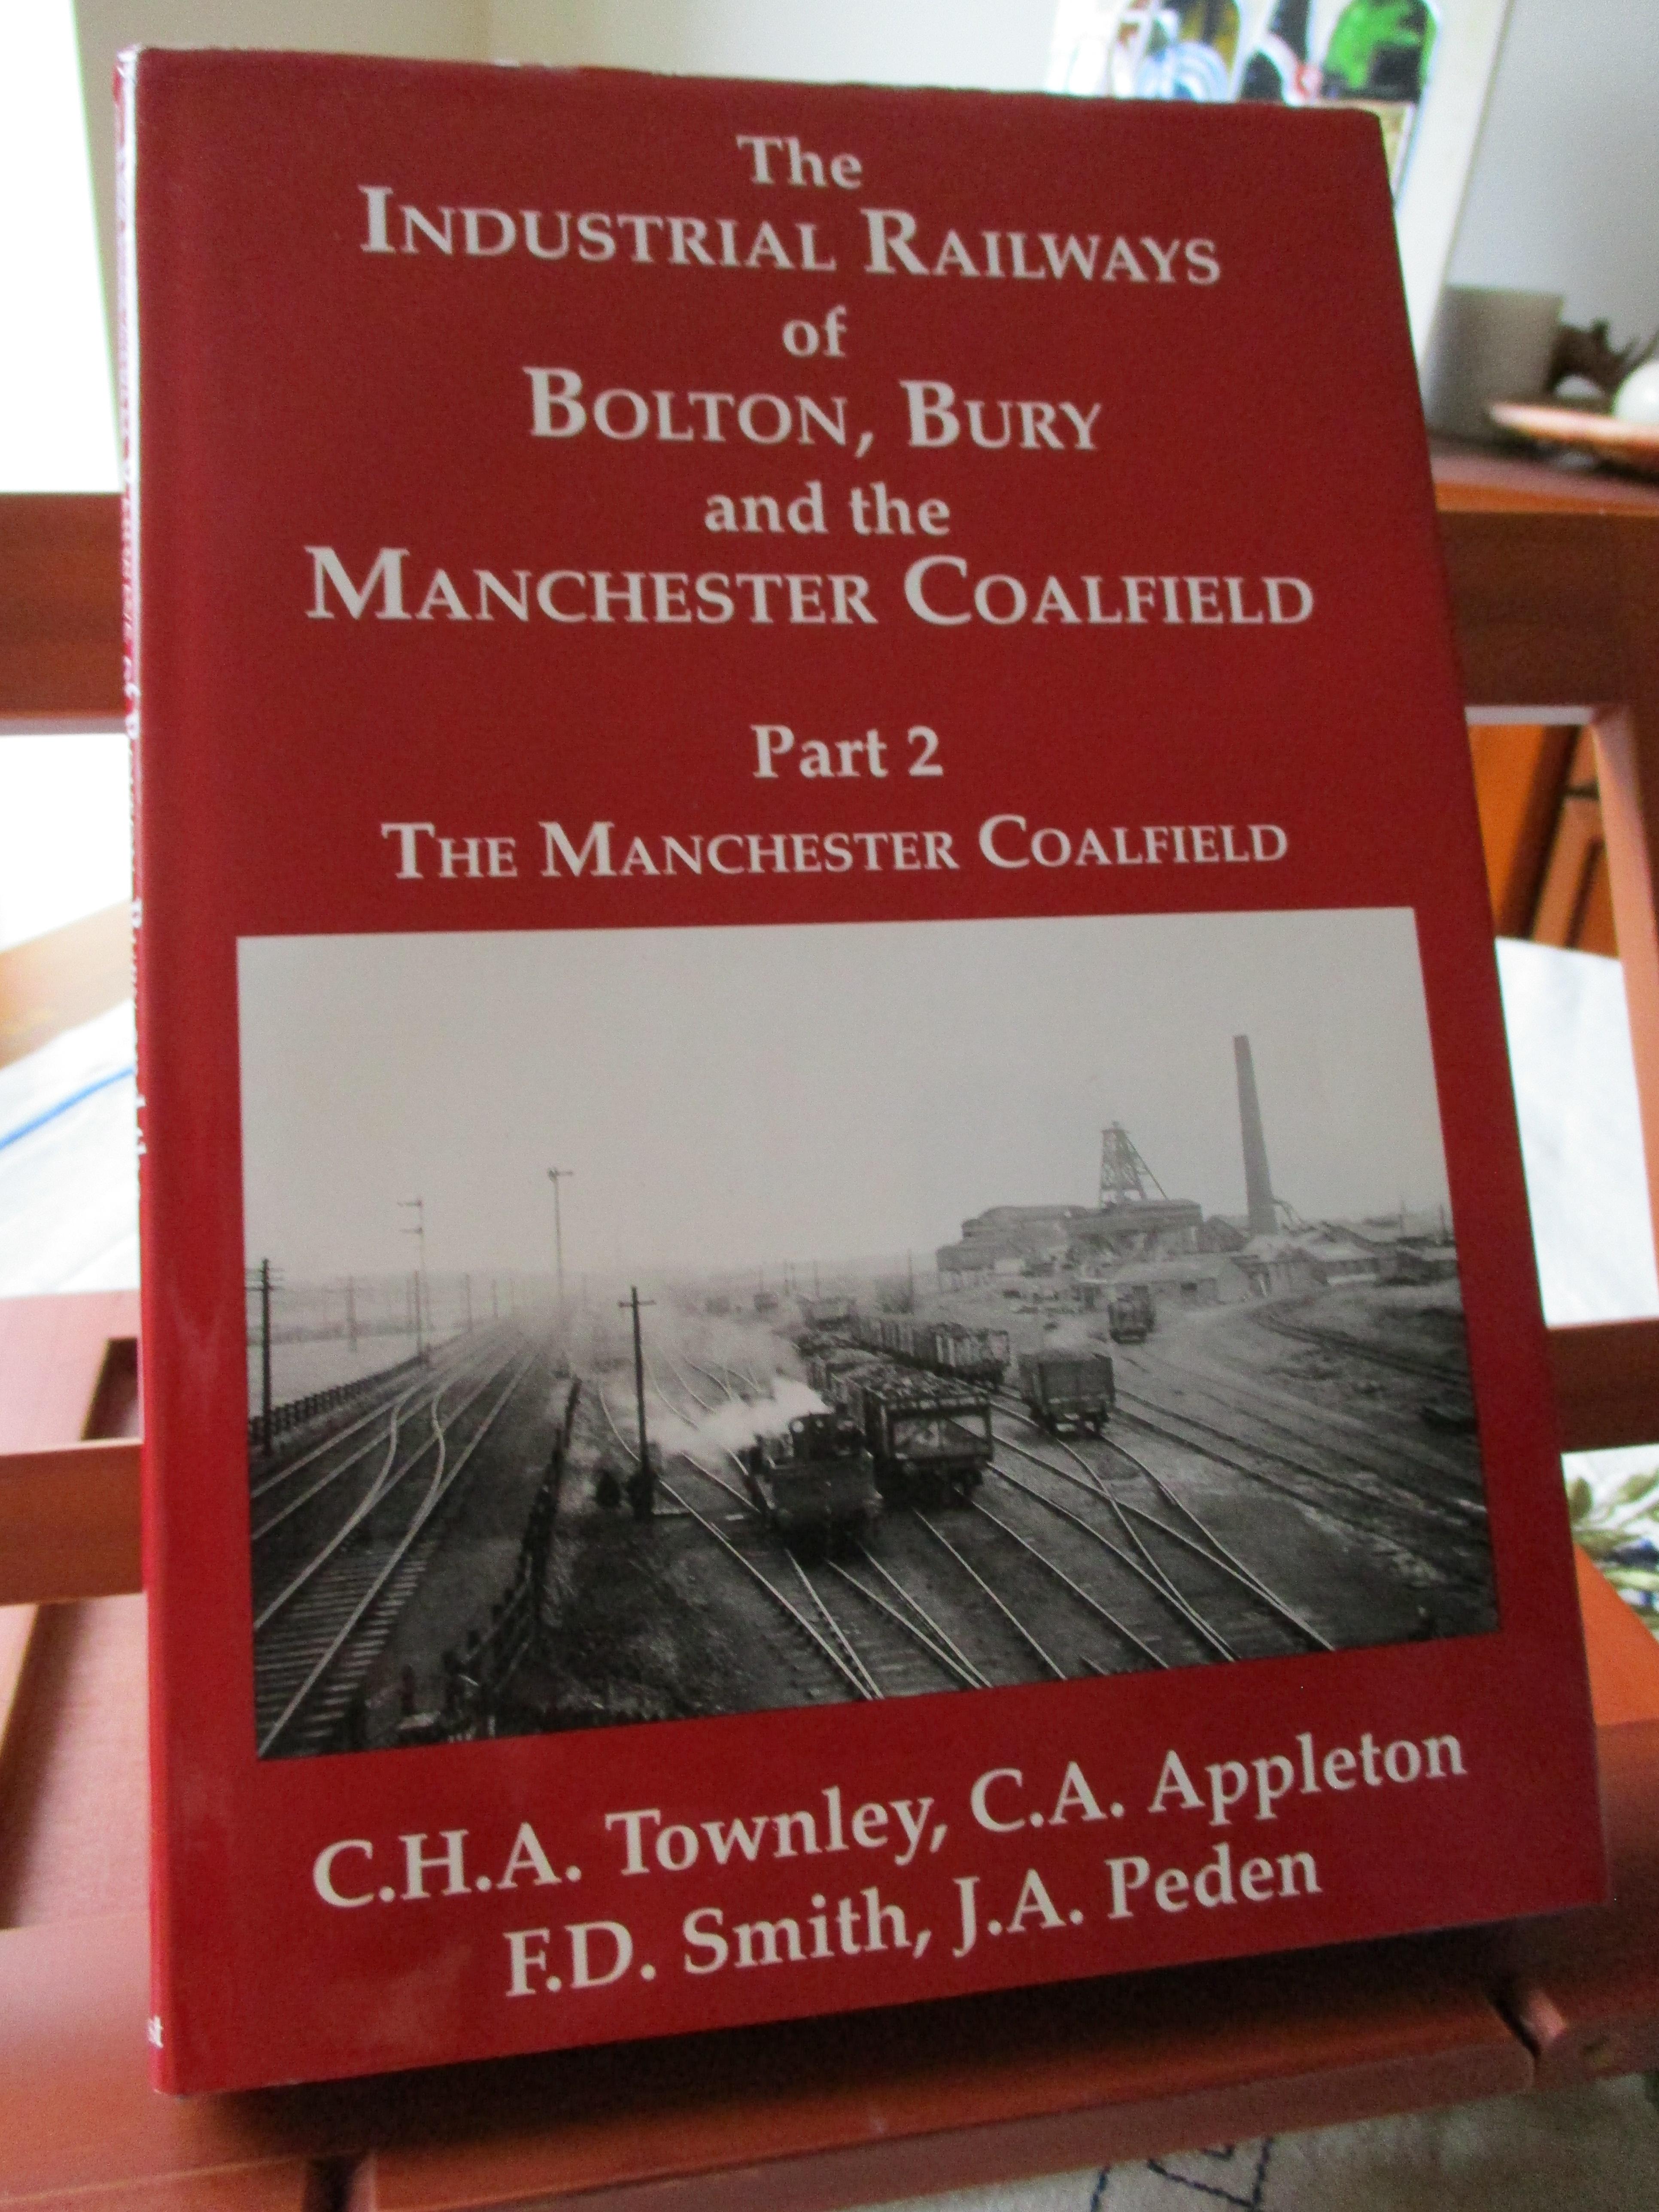 The Industrial Railways of Bolton, Bury and the Manchester Coalfield: The Manchester Coalfield Pt. 2 - Townley, Harry; Smith, F.D.; Peden, J.A.